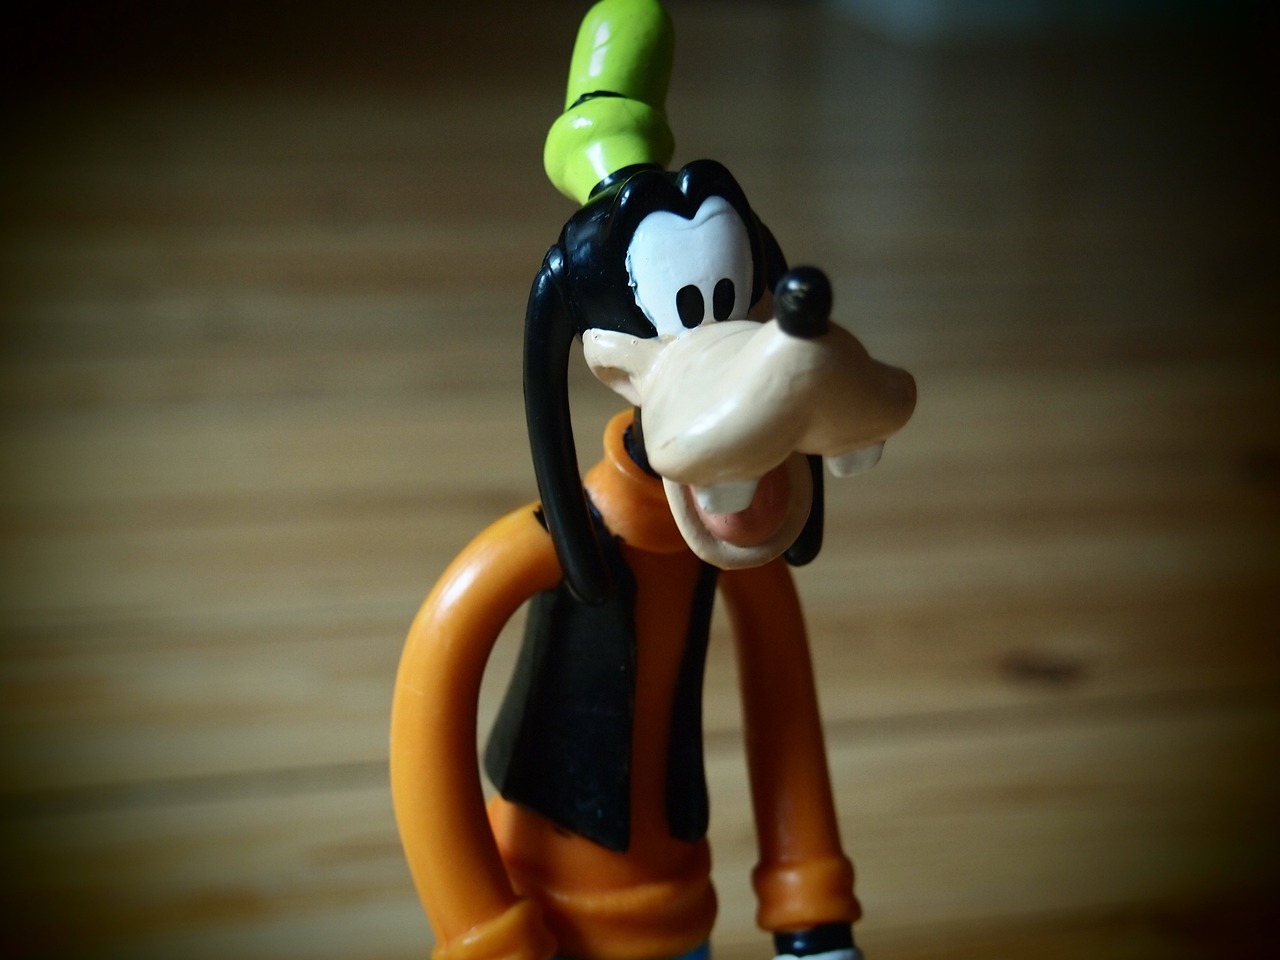 a close up of a toy on a table, inspired by Tex Avery, flickr, cobra, daffy duck, round teeth and goofy face, wearing green tophat, pluto